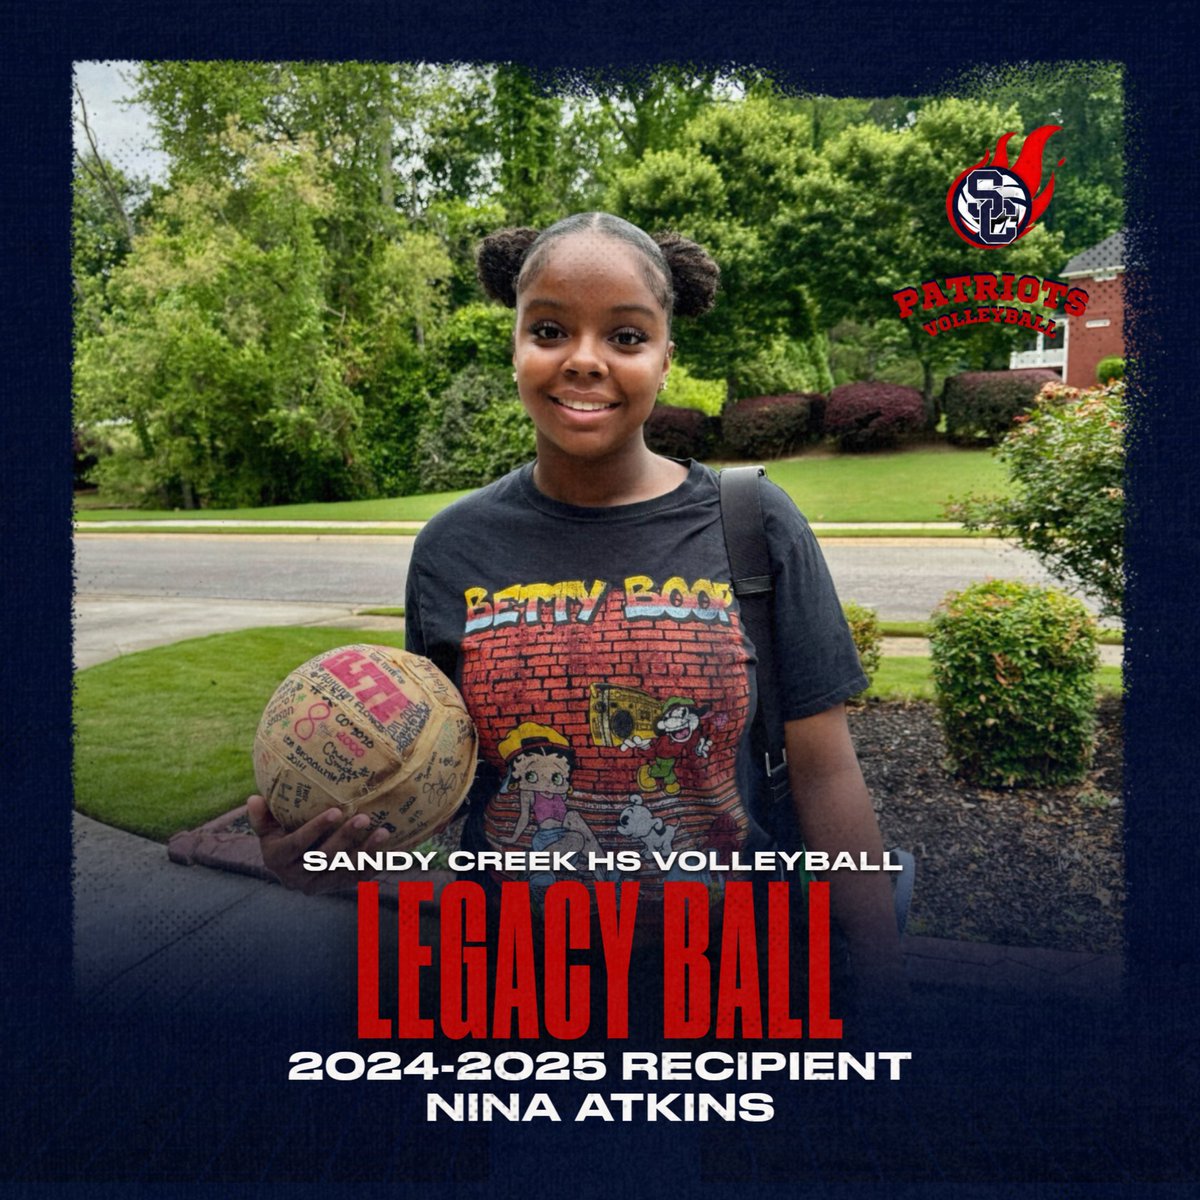 For many years, the SC VB team has cherished the tradition of the Legacy Ball. Each season, a graduating senior passes this symbolic ball to a rising senior. This year, Skye had the honor of presenting the Legacy Ball to Nina for the '24-'25 season. Congrats!